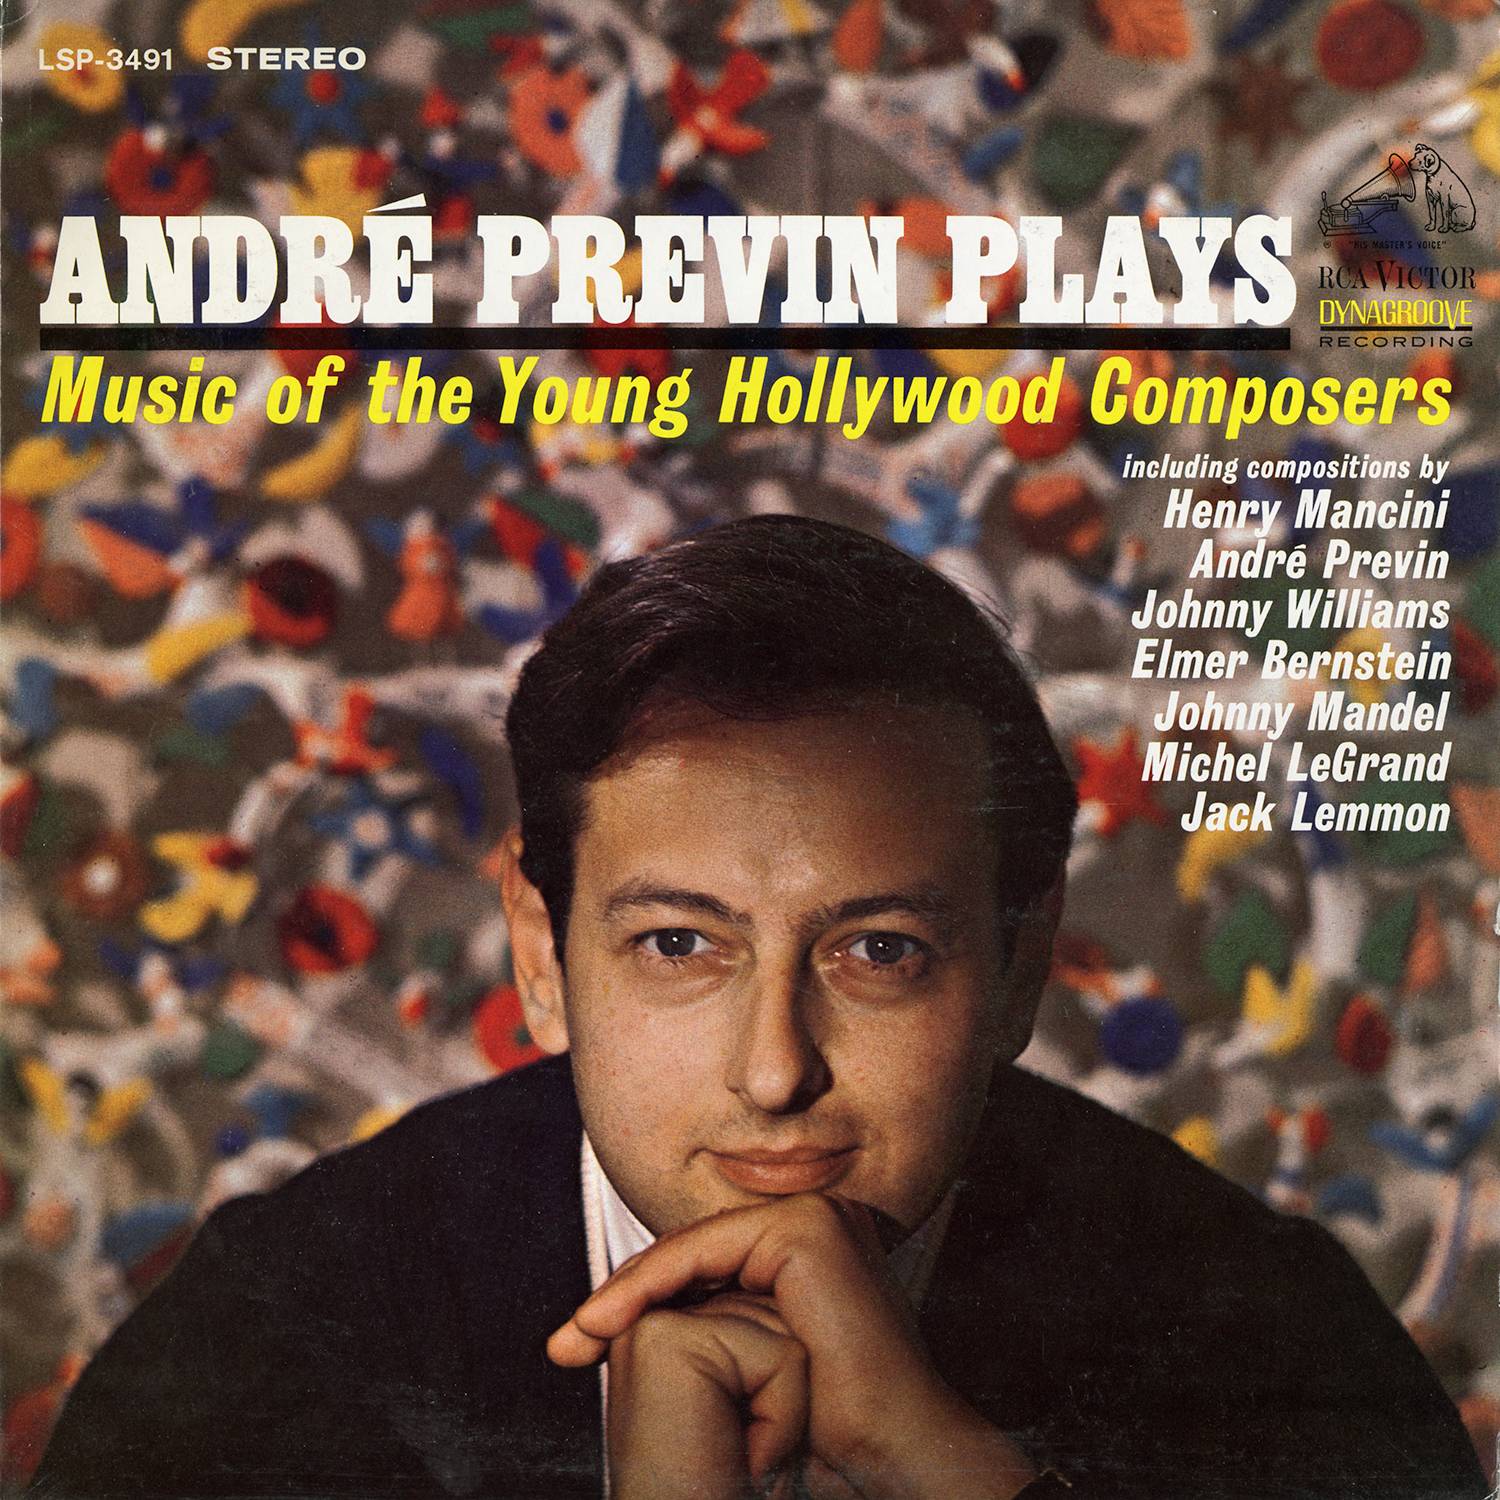 Andre Previn - Music Of The Young Hollywood Composers (1965/2015) [AcousticSounds FLAC 24bit/96kHz]